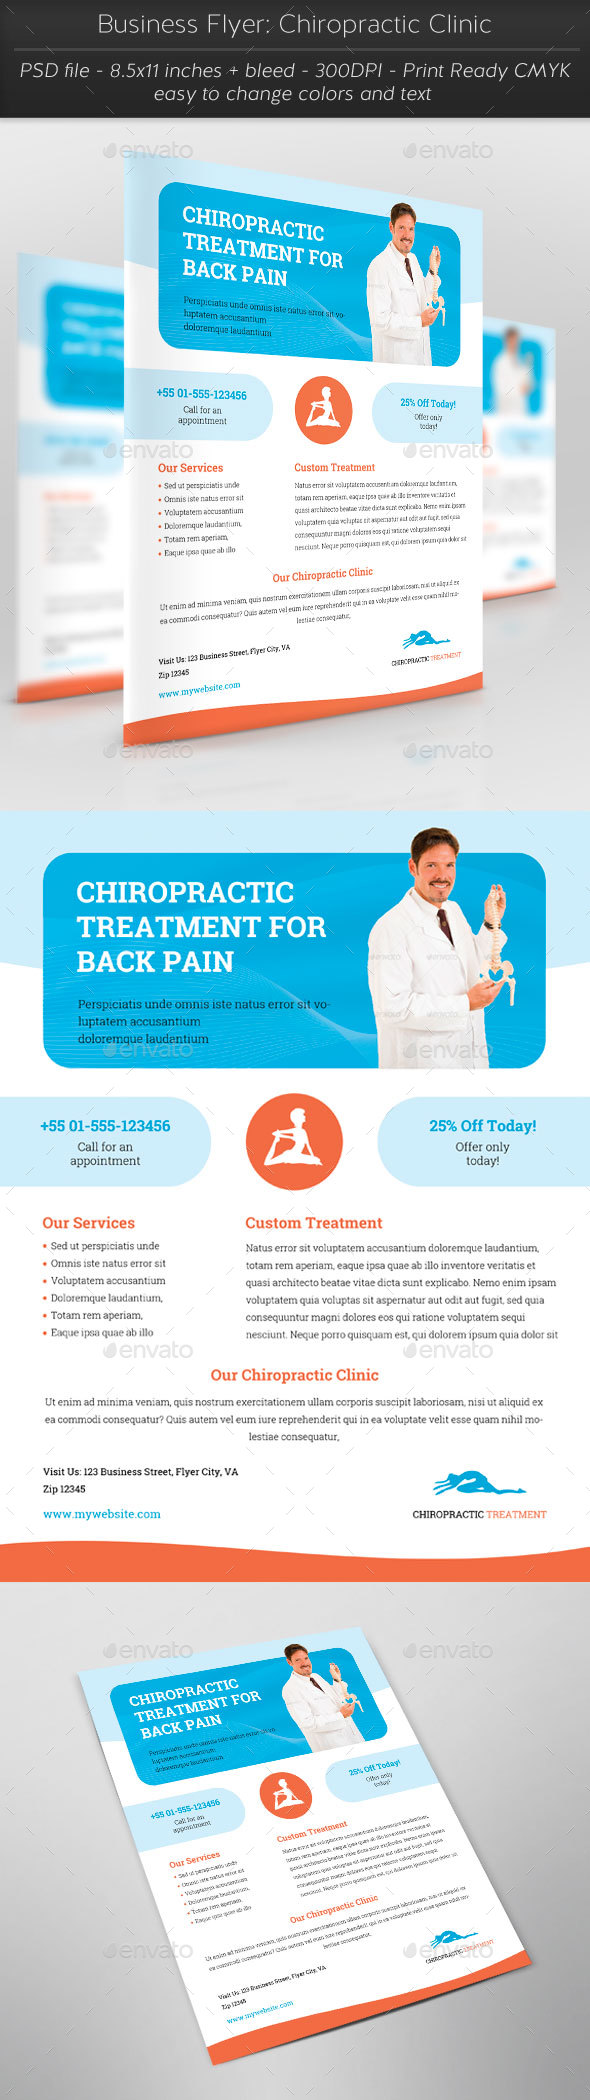 Business Flyer: Chiropractic Clinic